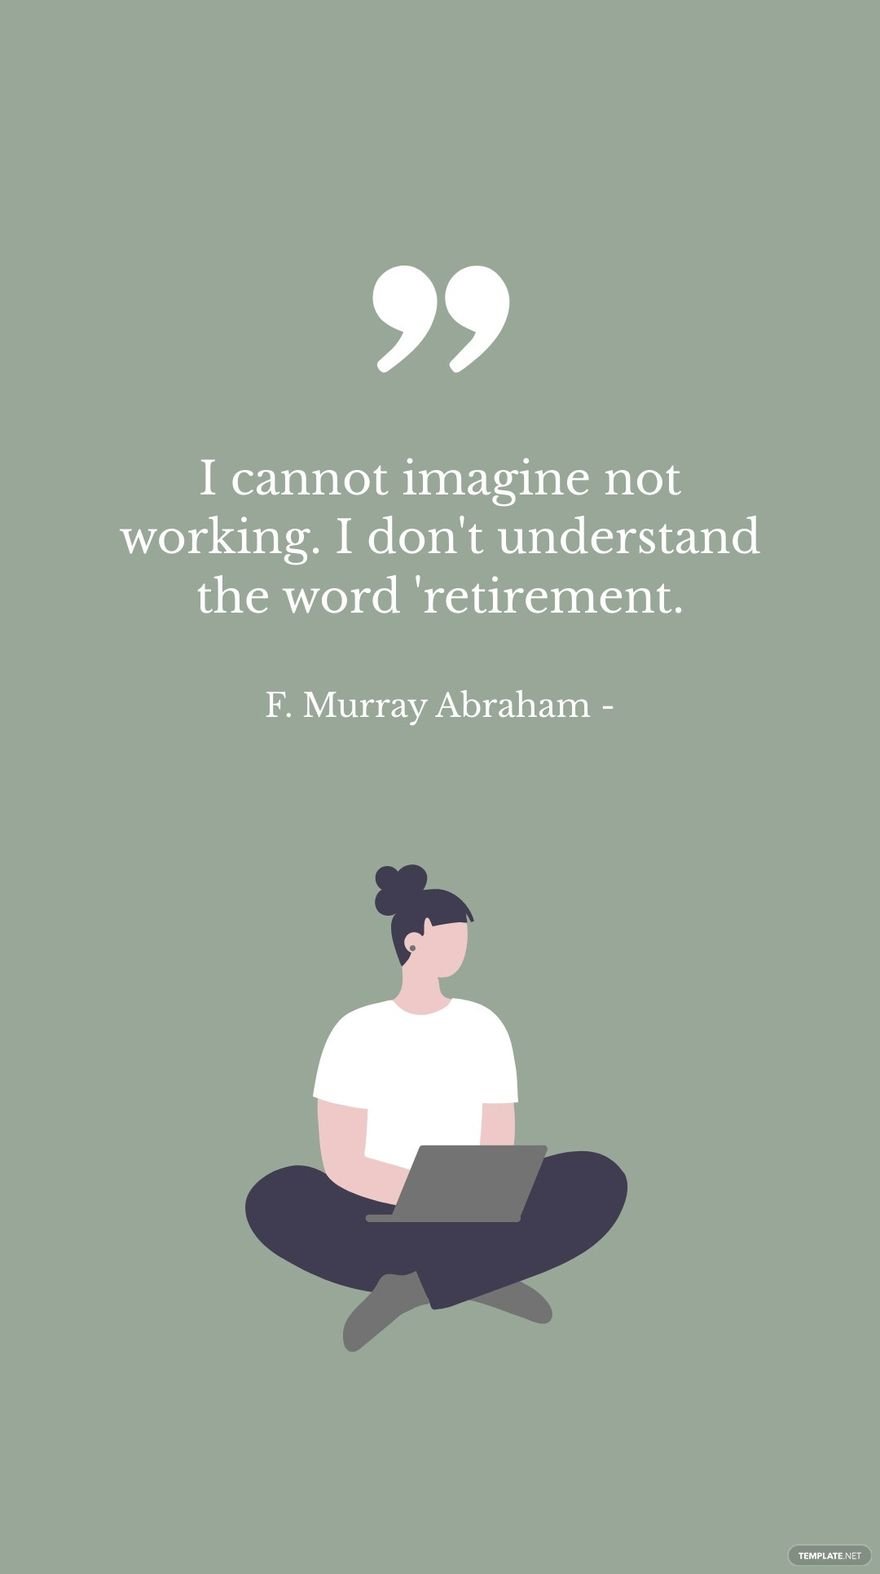 Free F. Murray Abraham - I cannot imagine not working. I don't understand the word 'retirement. in JPG